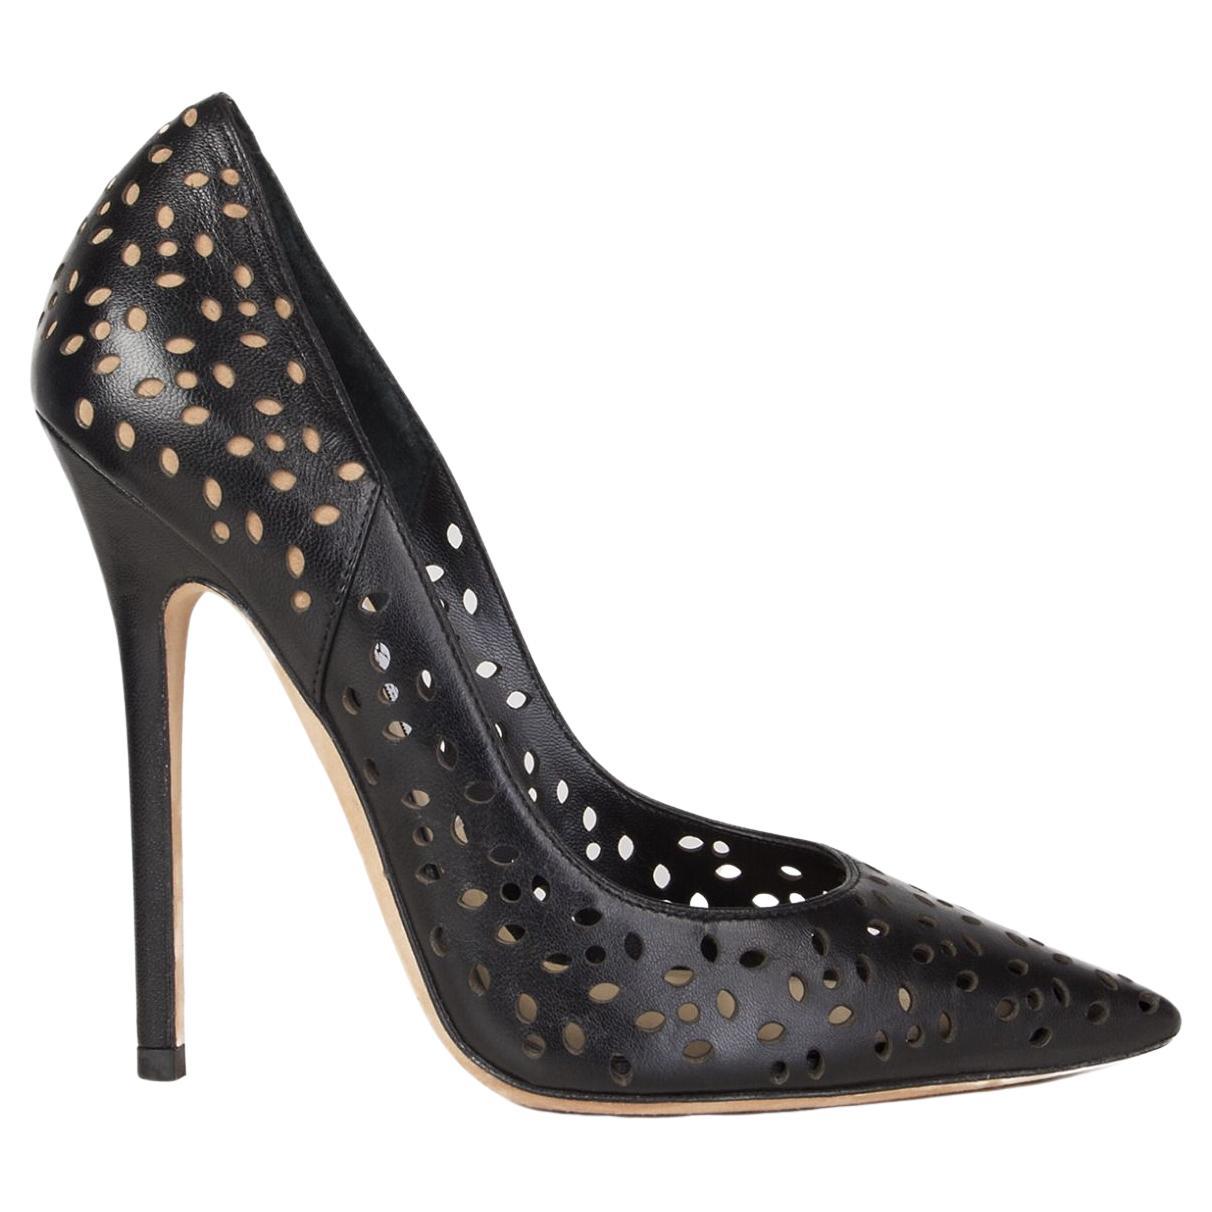 JIMMY CHOO black leather ANOUK Perforated Pumps Shoes 36 For Sale